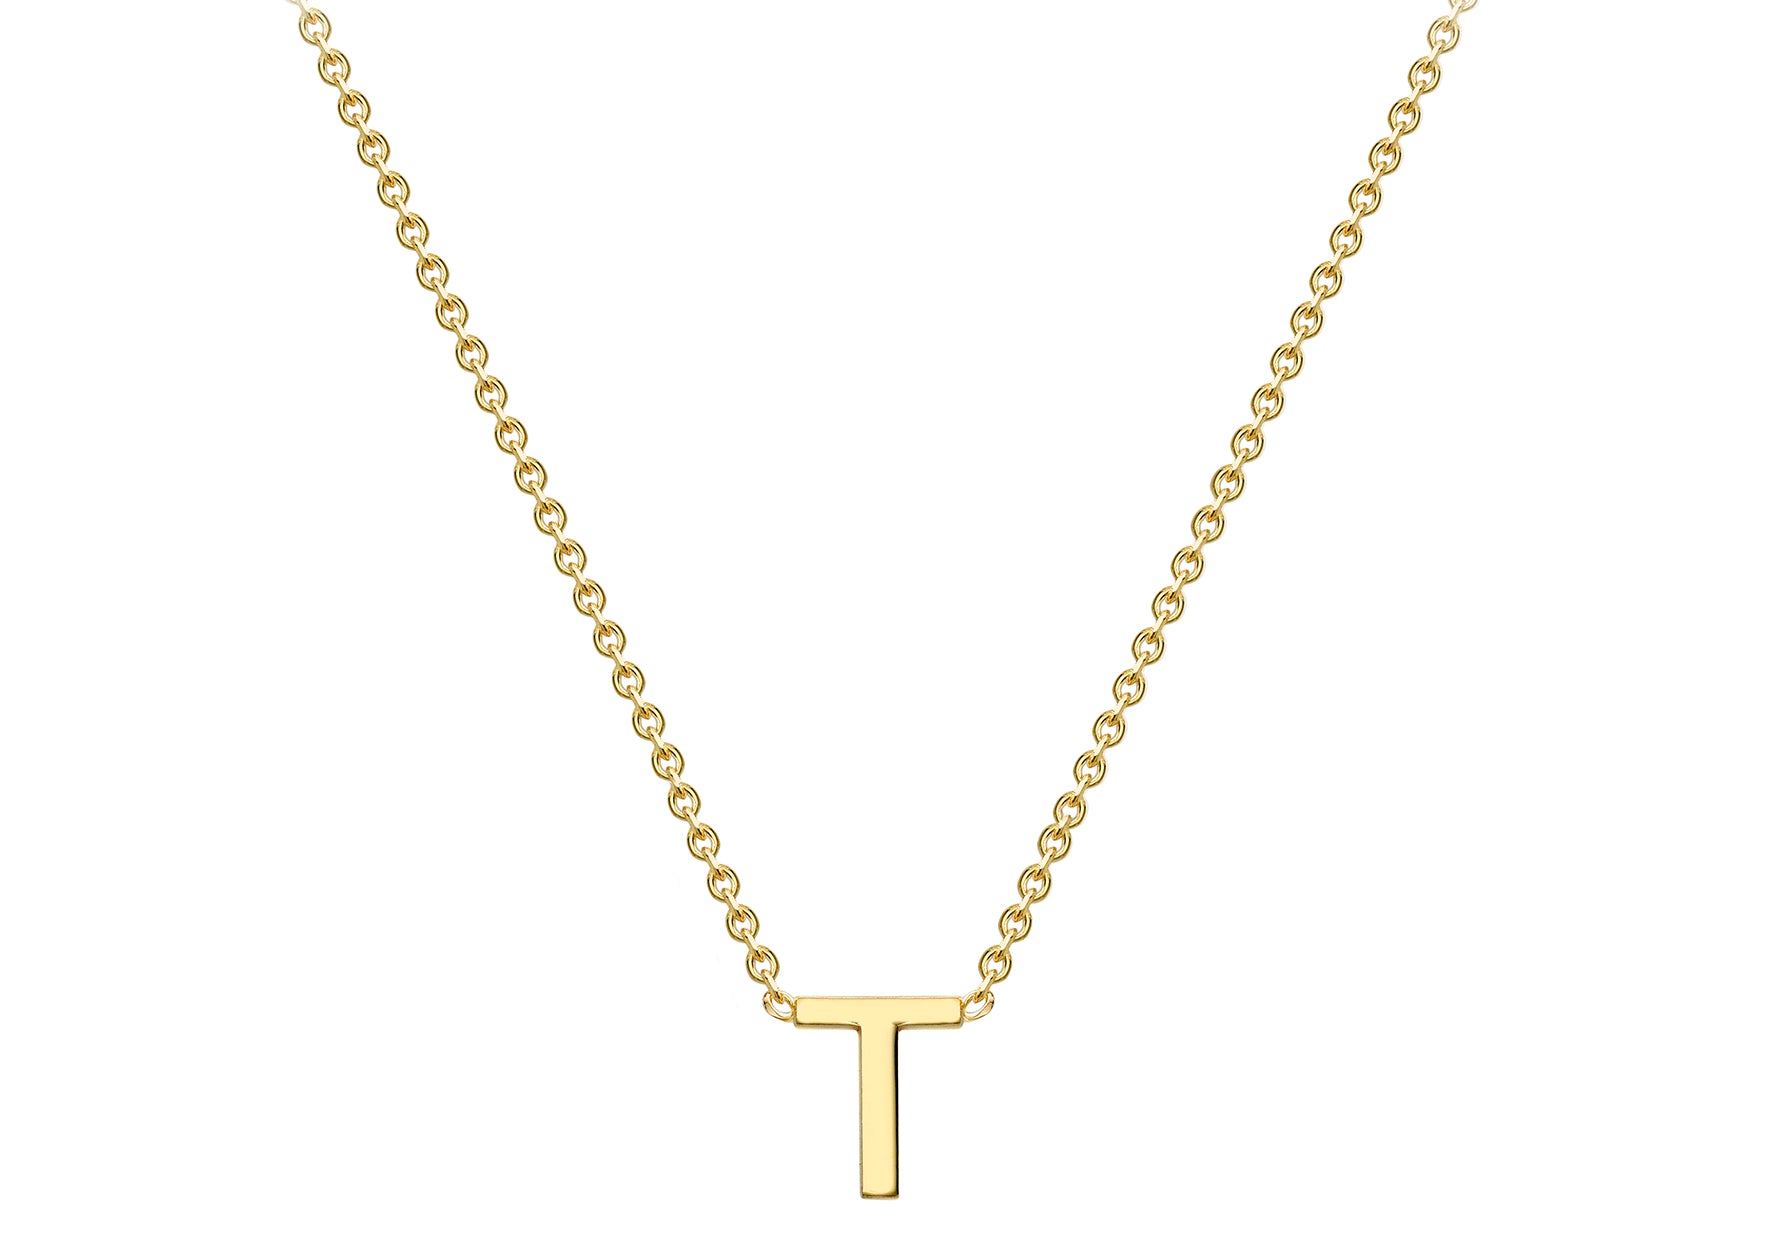 9ct Yellow Gold Plain Single Initial T Necklace